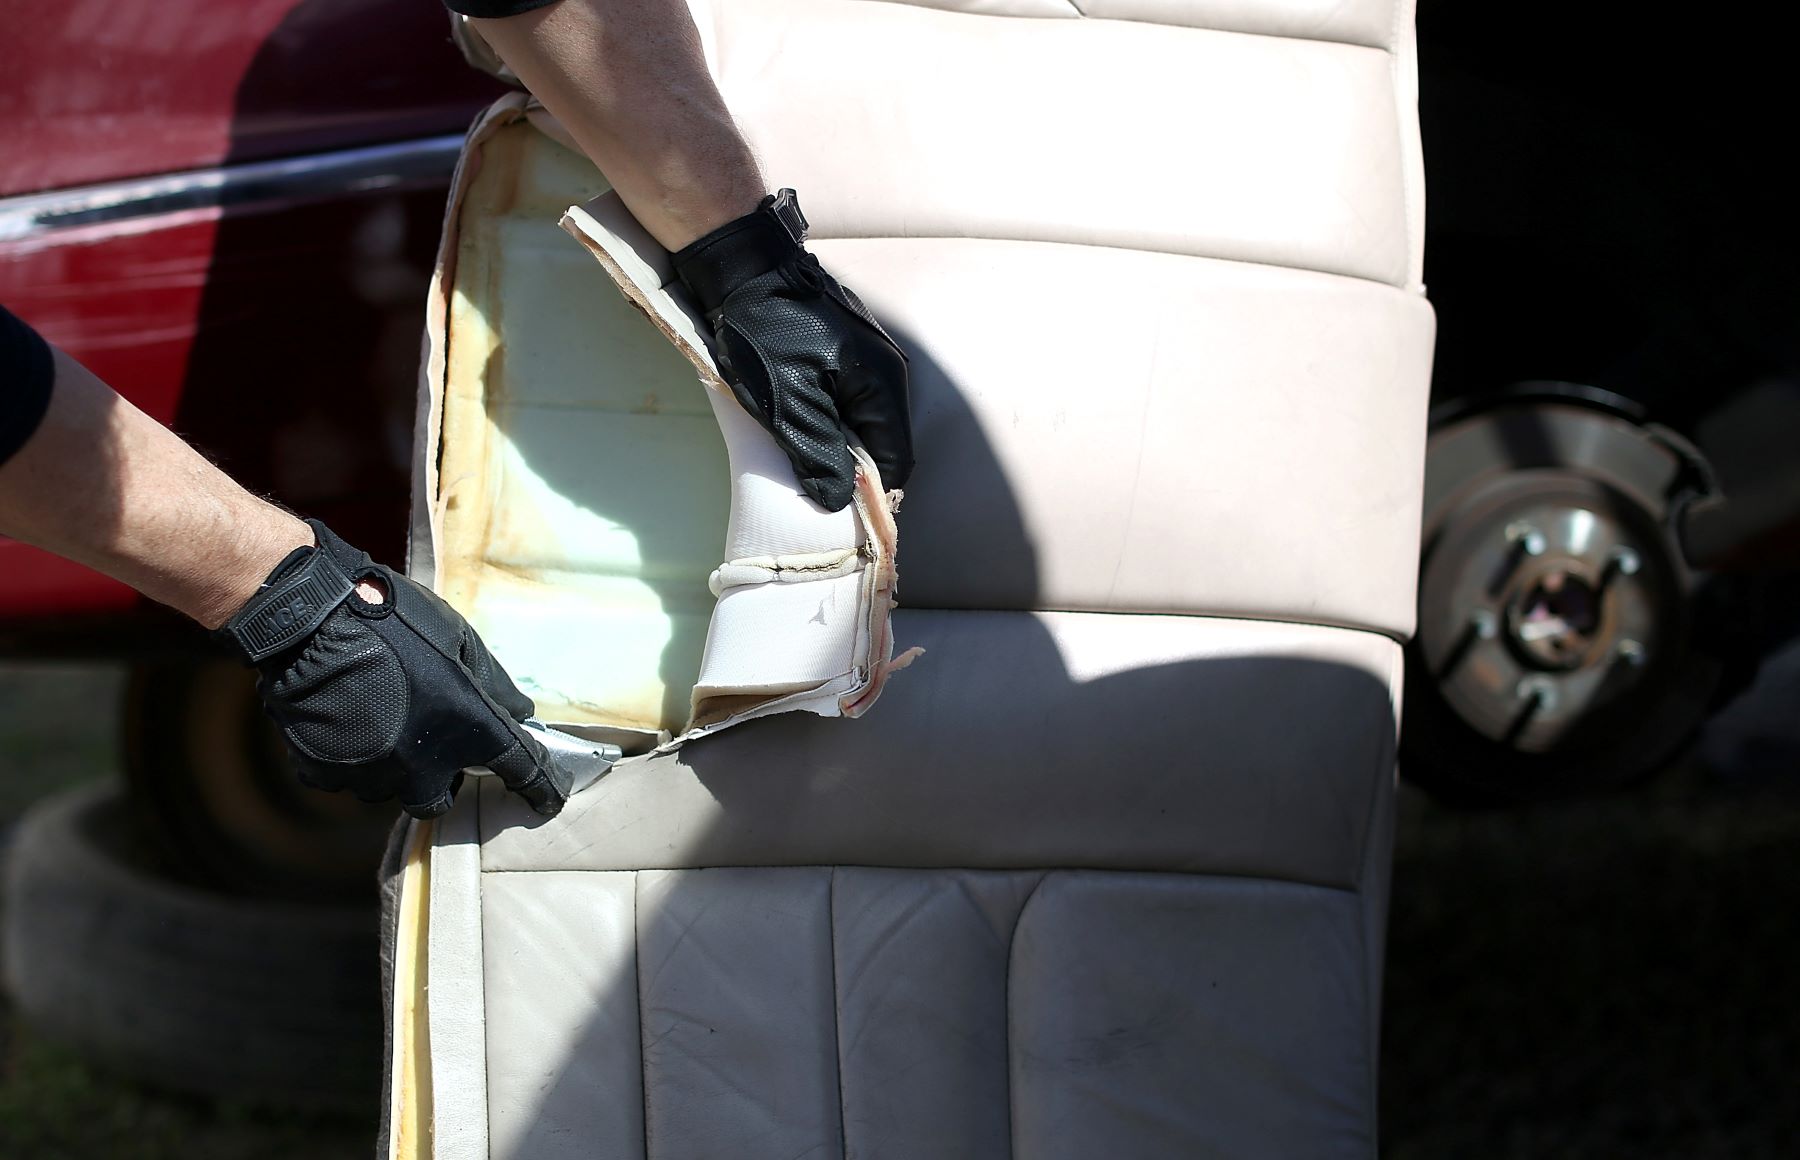 Removing old car seat leather upholstery during a reupholster process on a salvaged luxury car